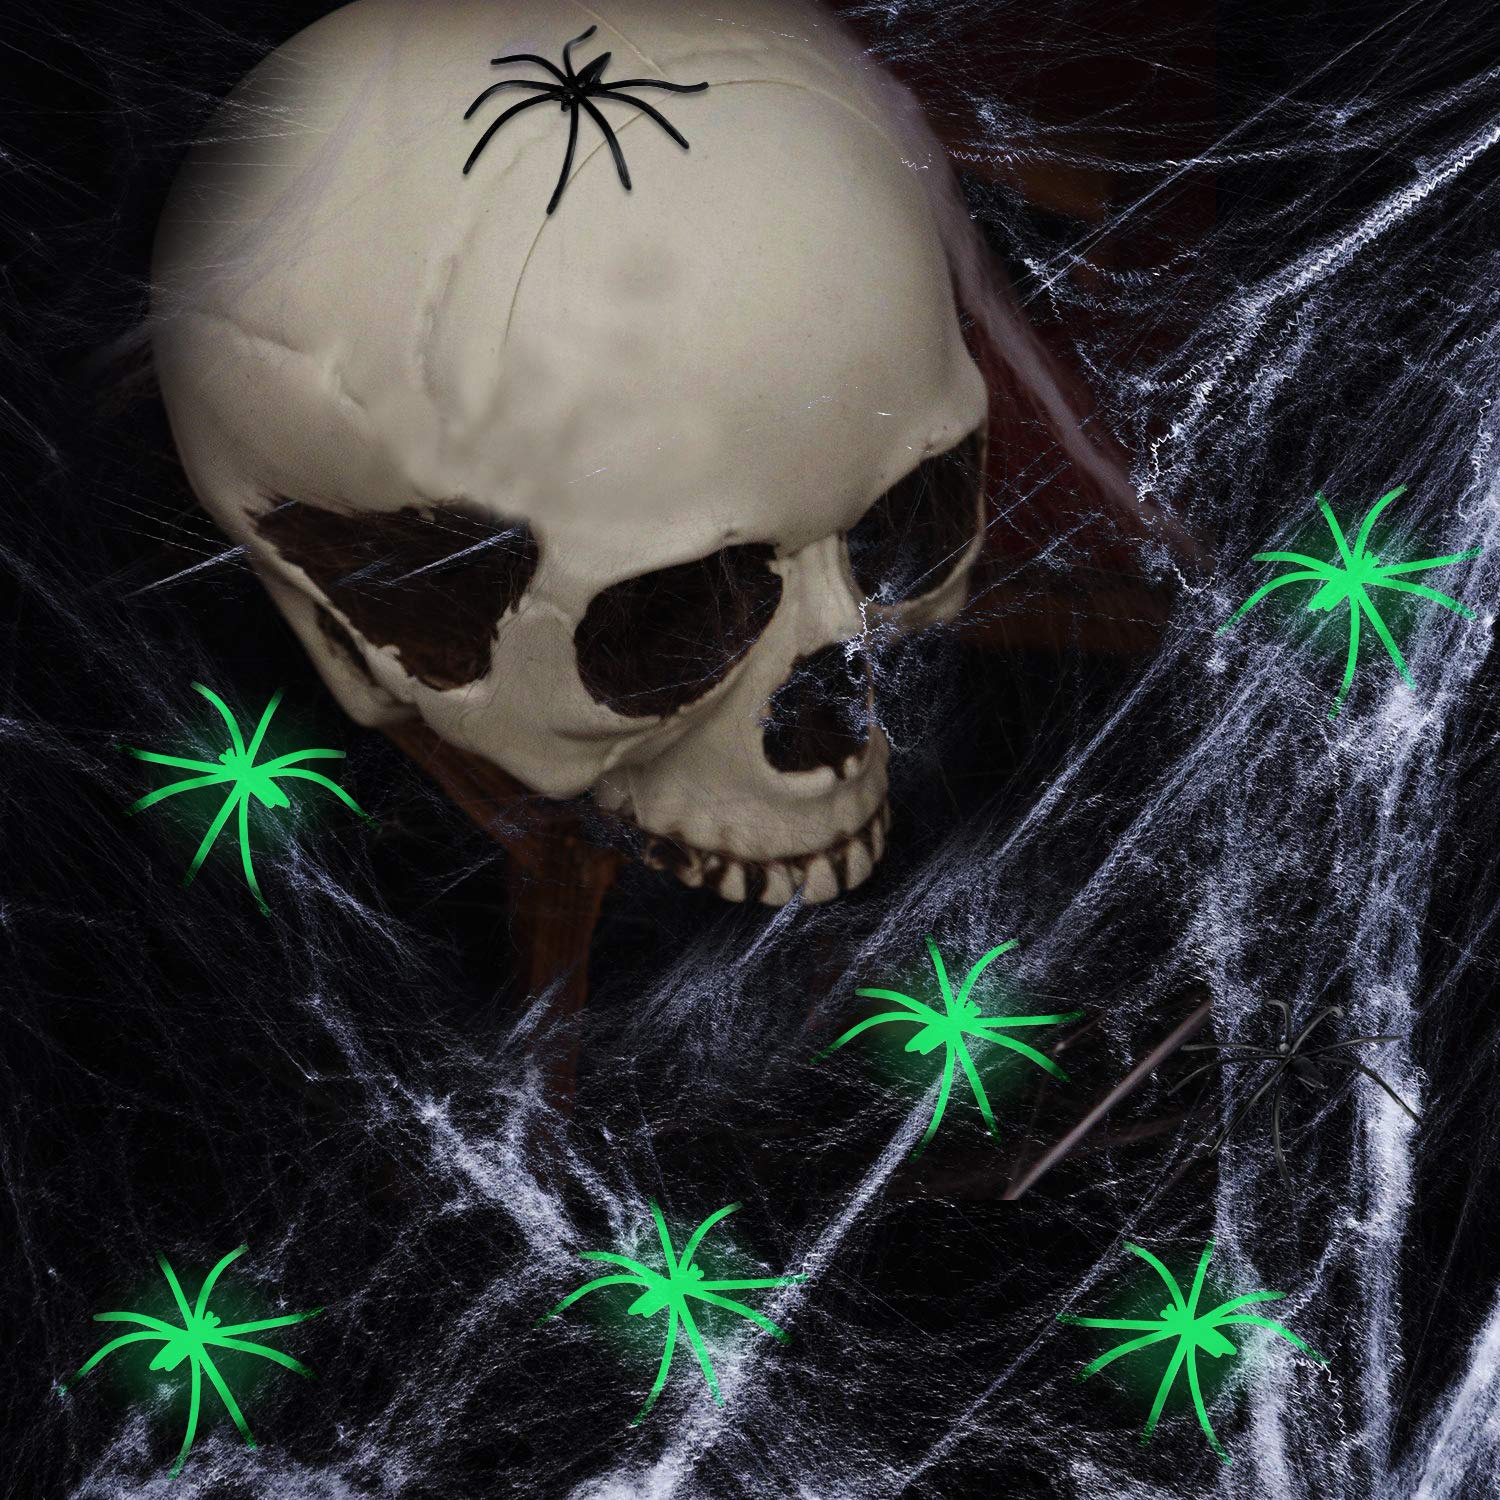 Halloween Decorations Spider Webs - 1200sqft Spider Web Decor +100 Black Spiders + 50 Fluorescent spiders, Indoor Outdoor Spooky Spider Webbing with Fake Spiders for Halloween Party Decorations